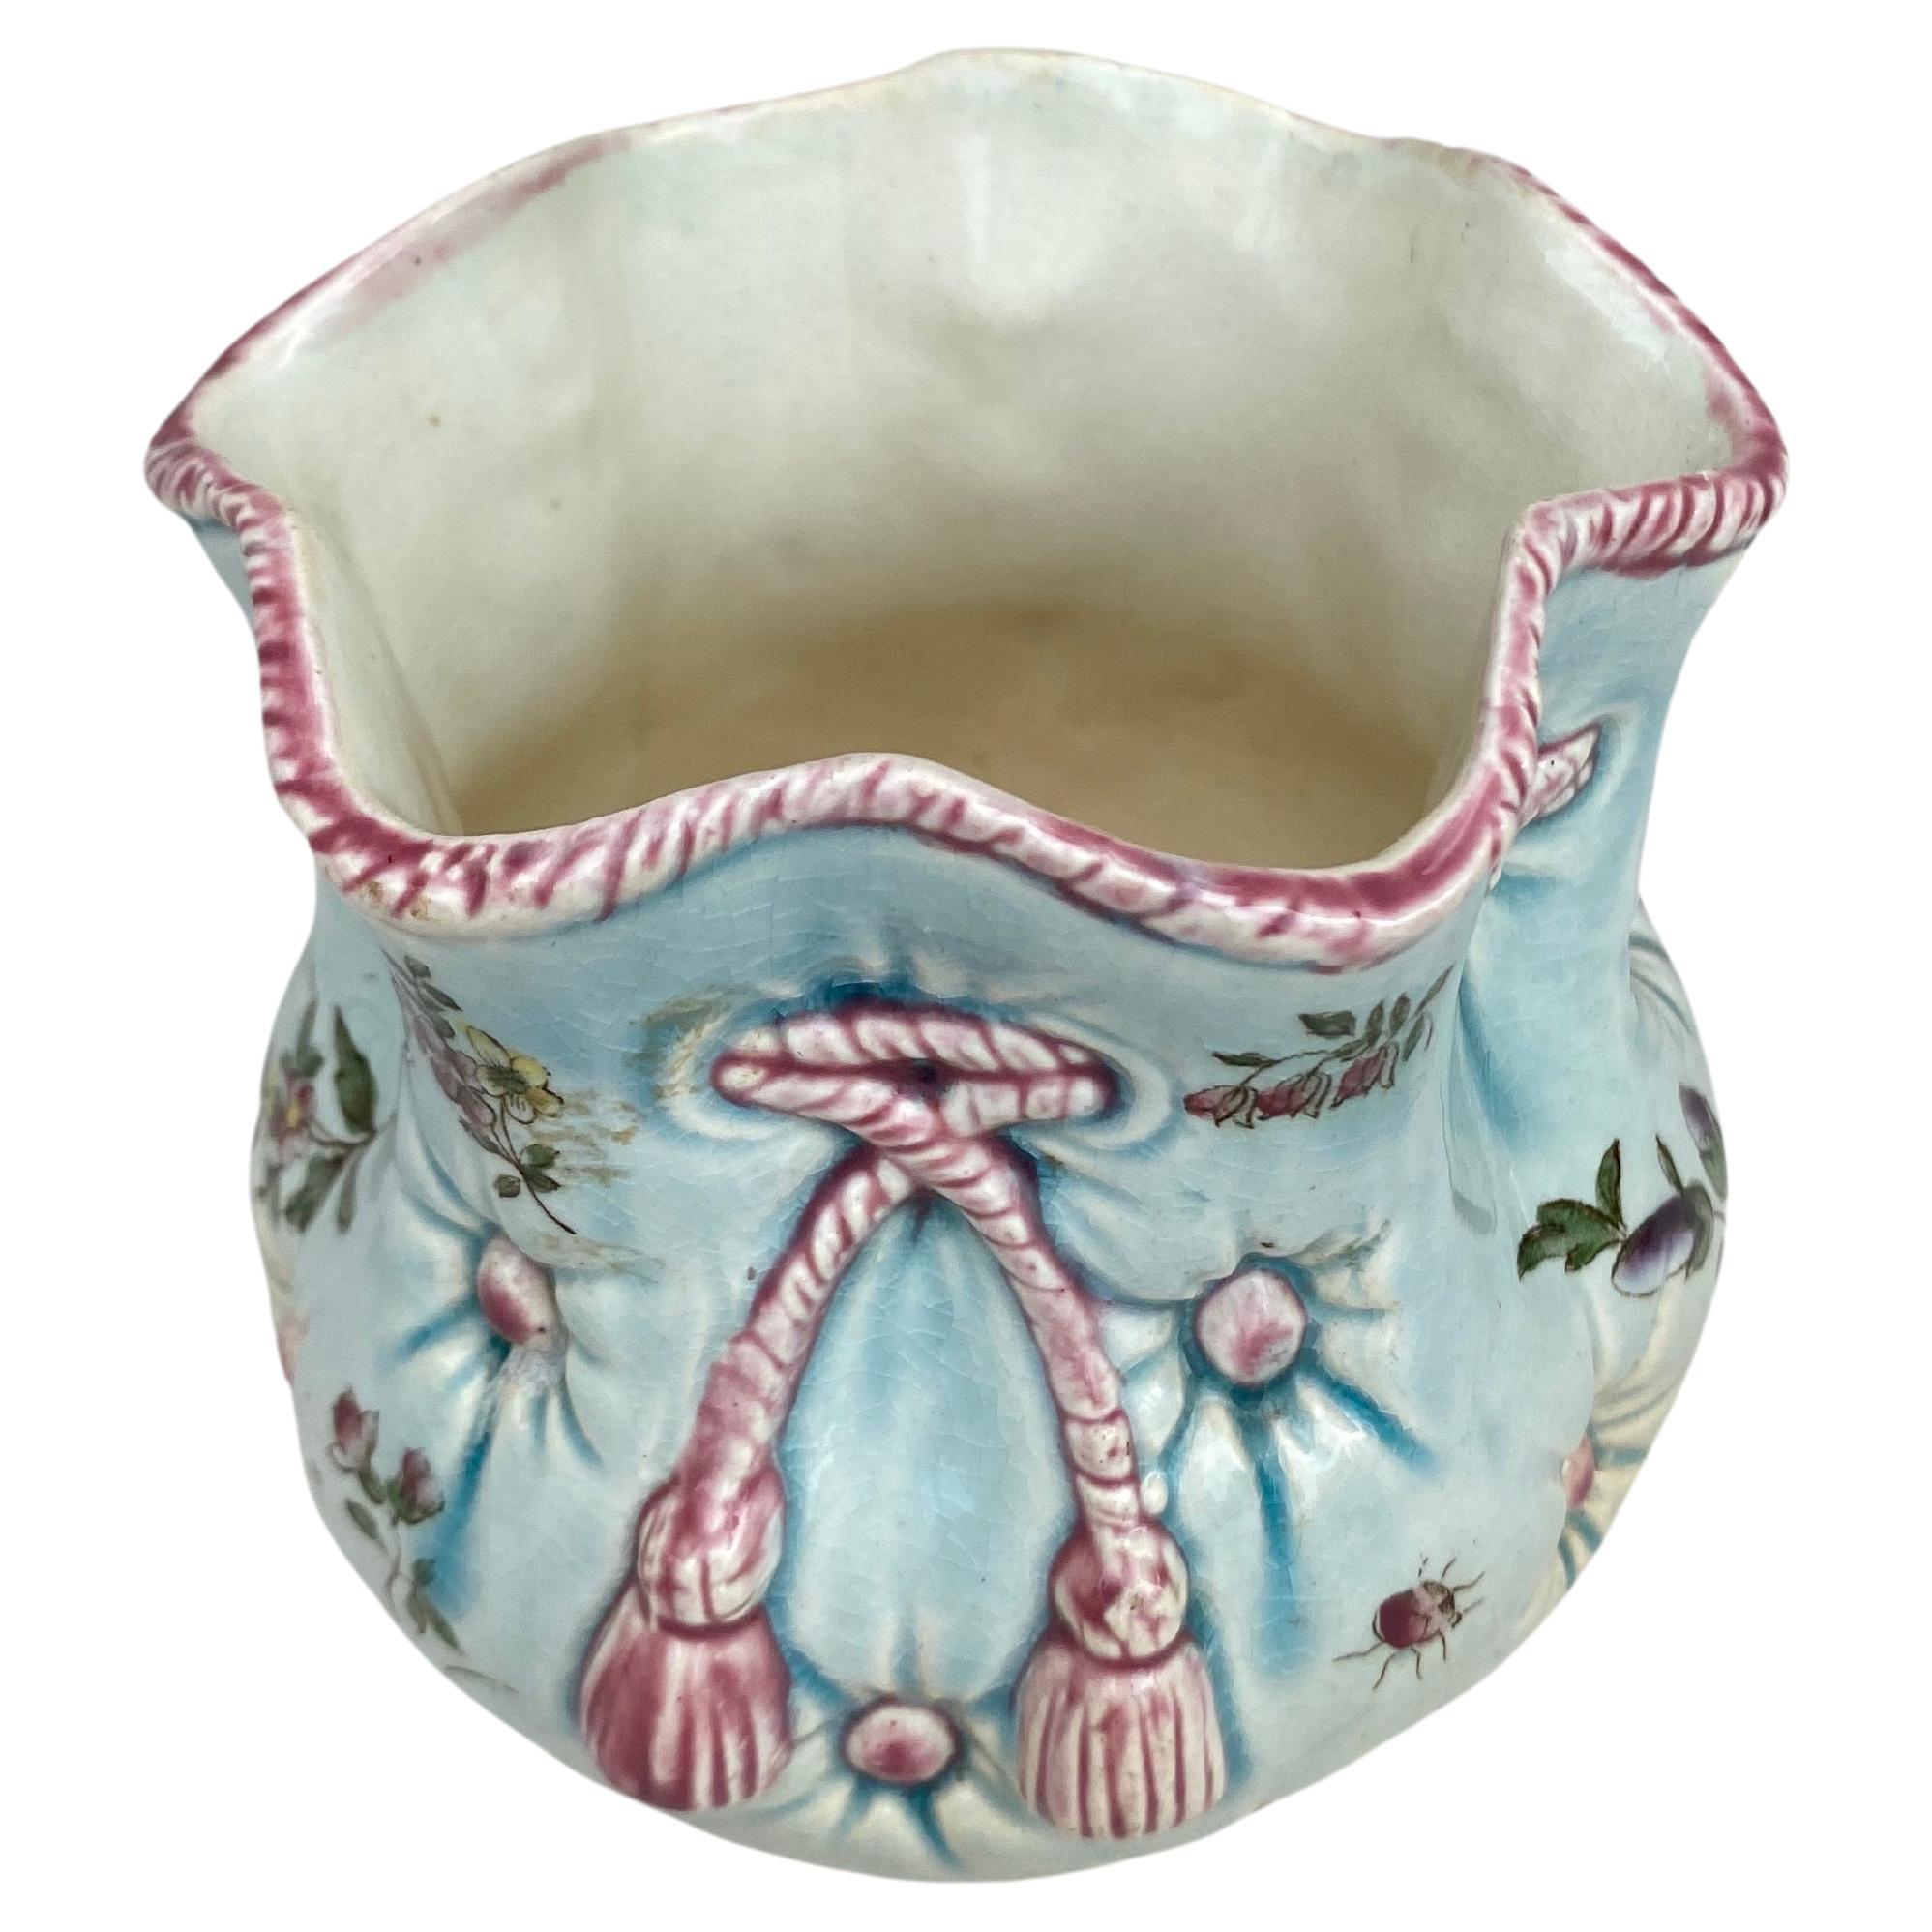 19th Century French Majolica cache pot bag signed Fives Lille.
Painted with flowers and insects.